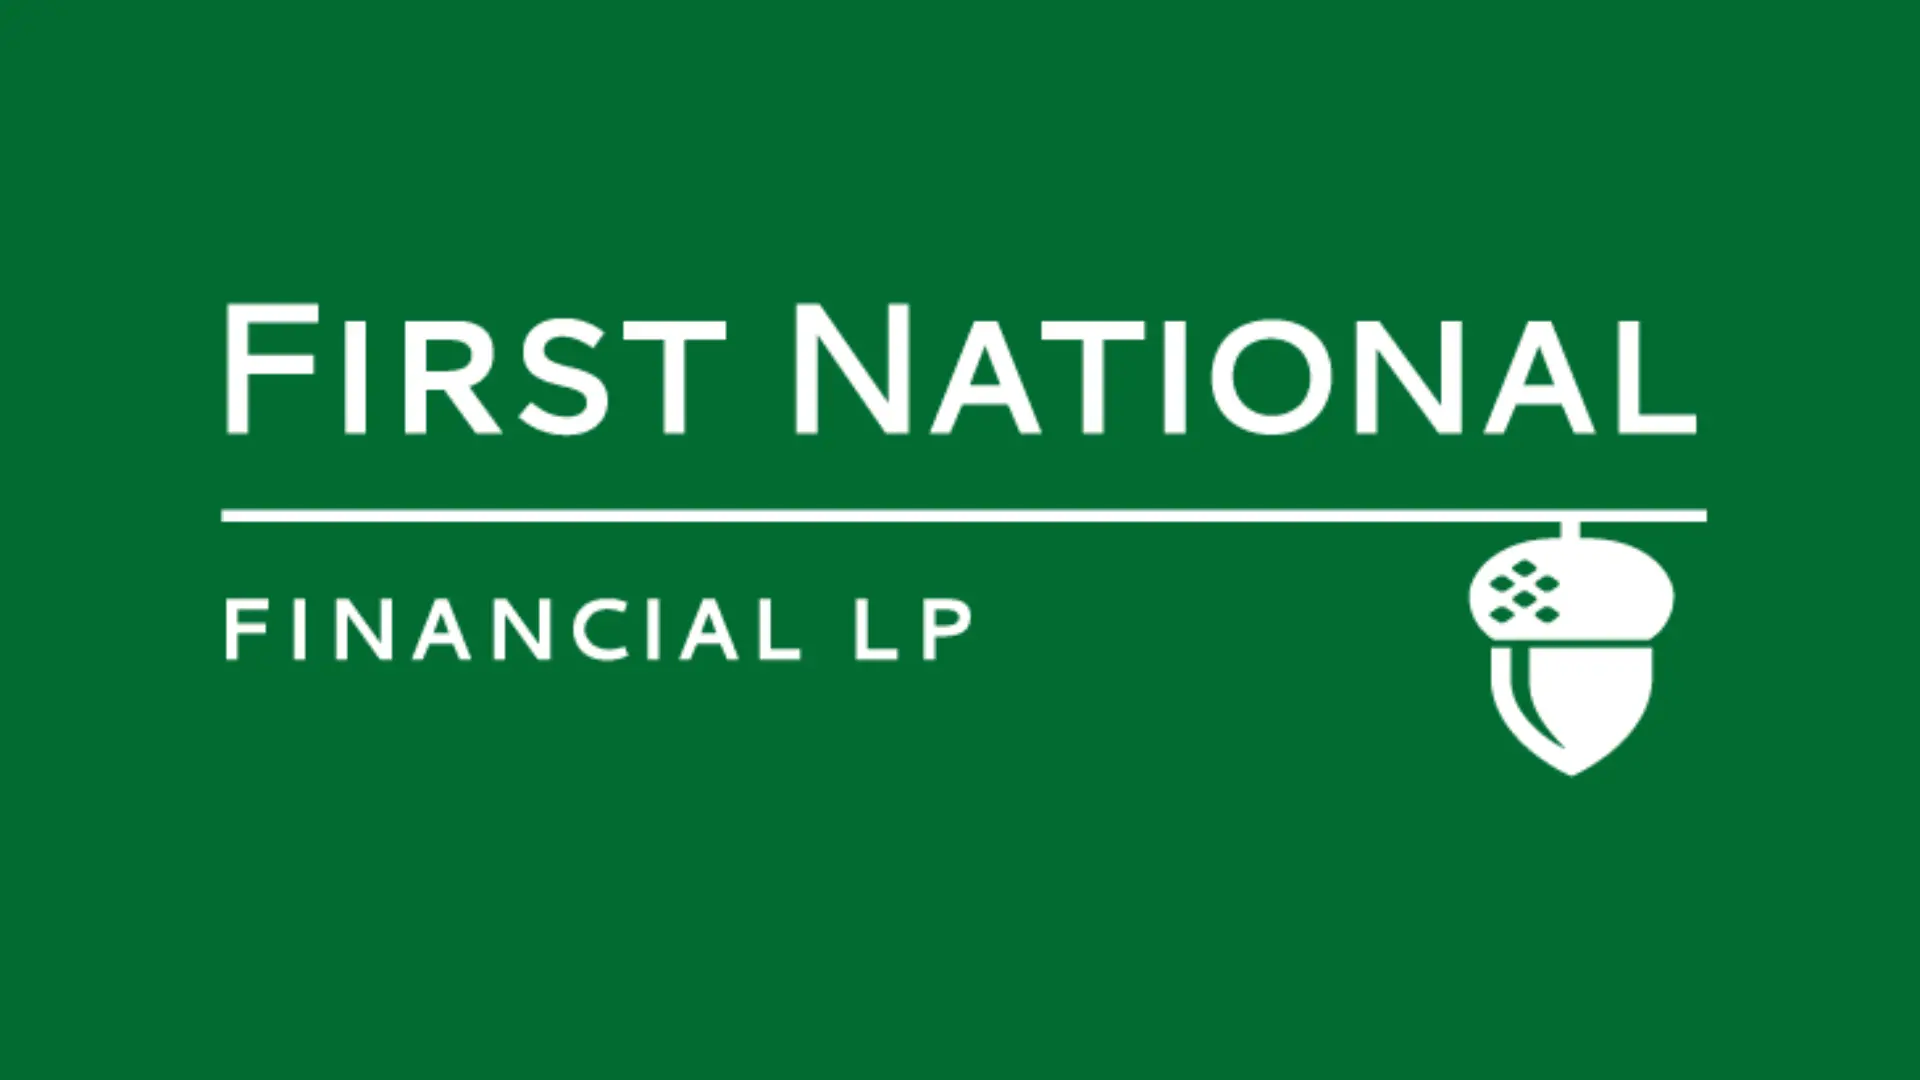 First National - 5 Year Insured 20 Bps Extra Compensation!